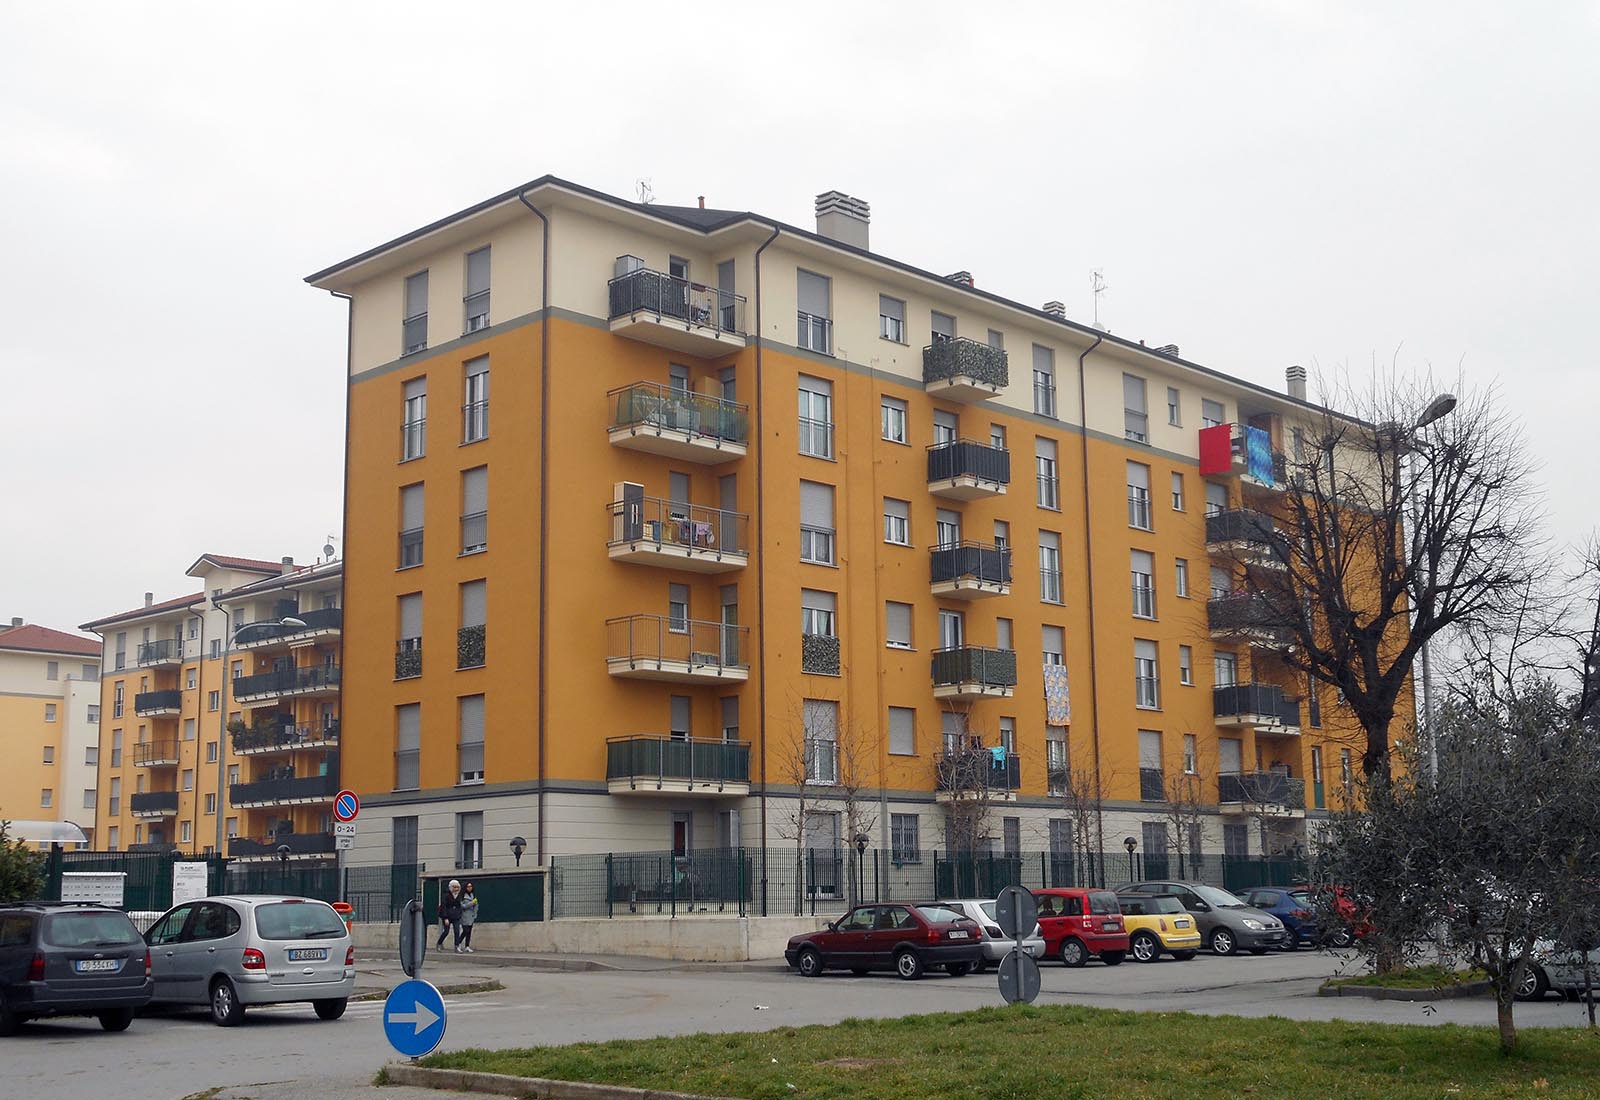 Residential building Aler property in Lissone - View